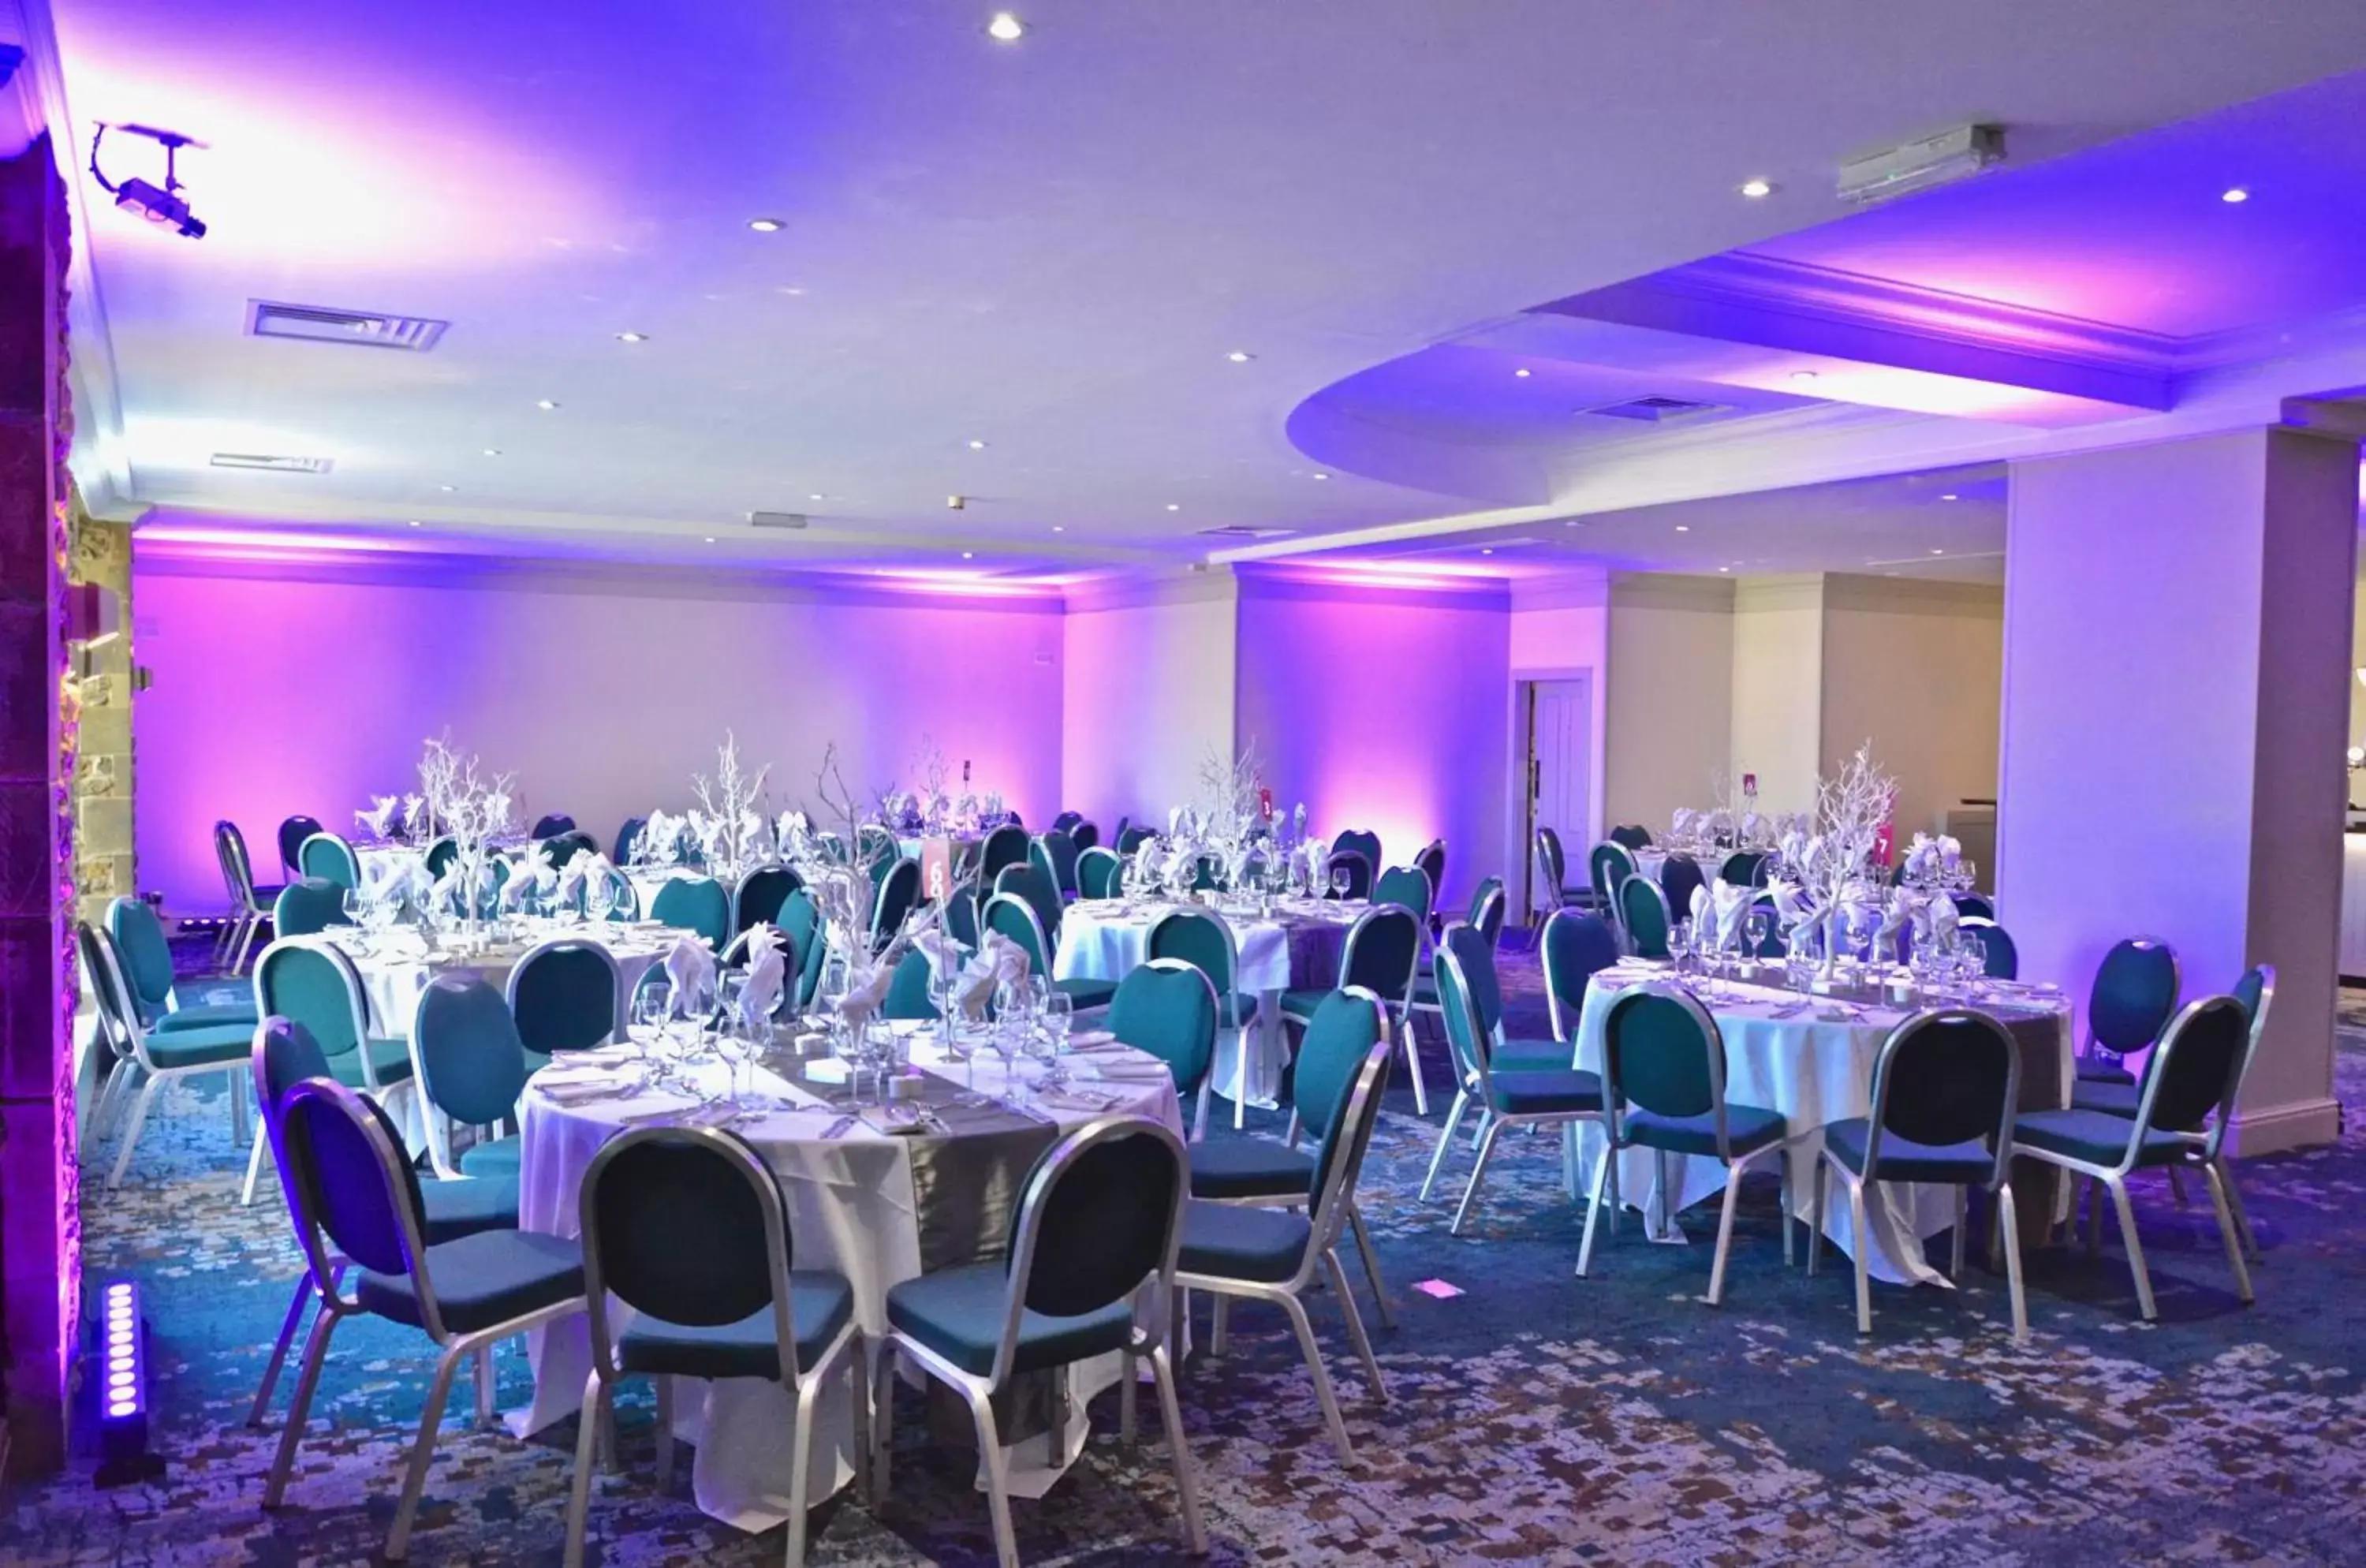 Banquet/Function facilities, Banquet Facilities in Crowne Plaza Stratford-upon-Avon, an IHG Hotel